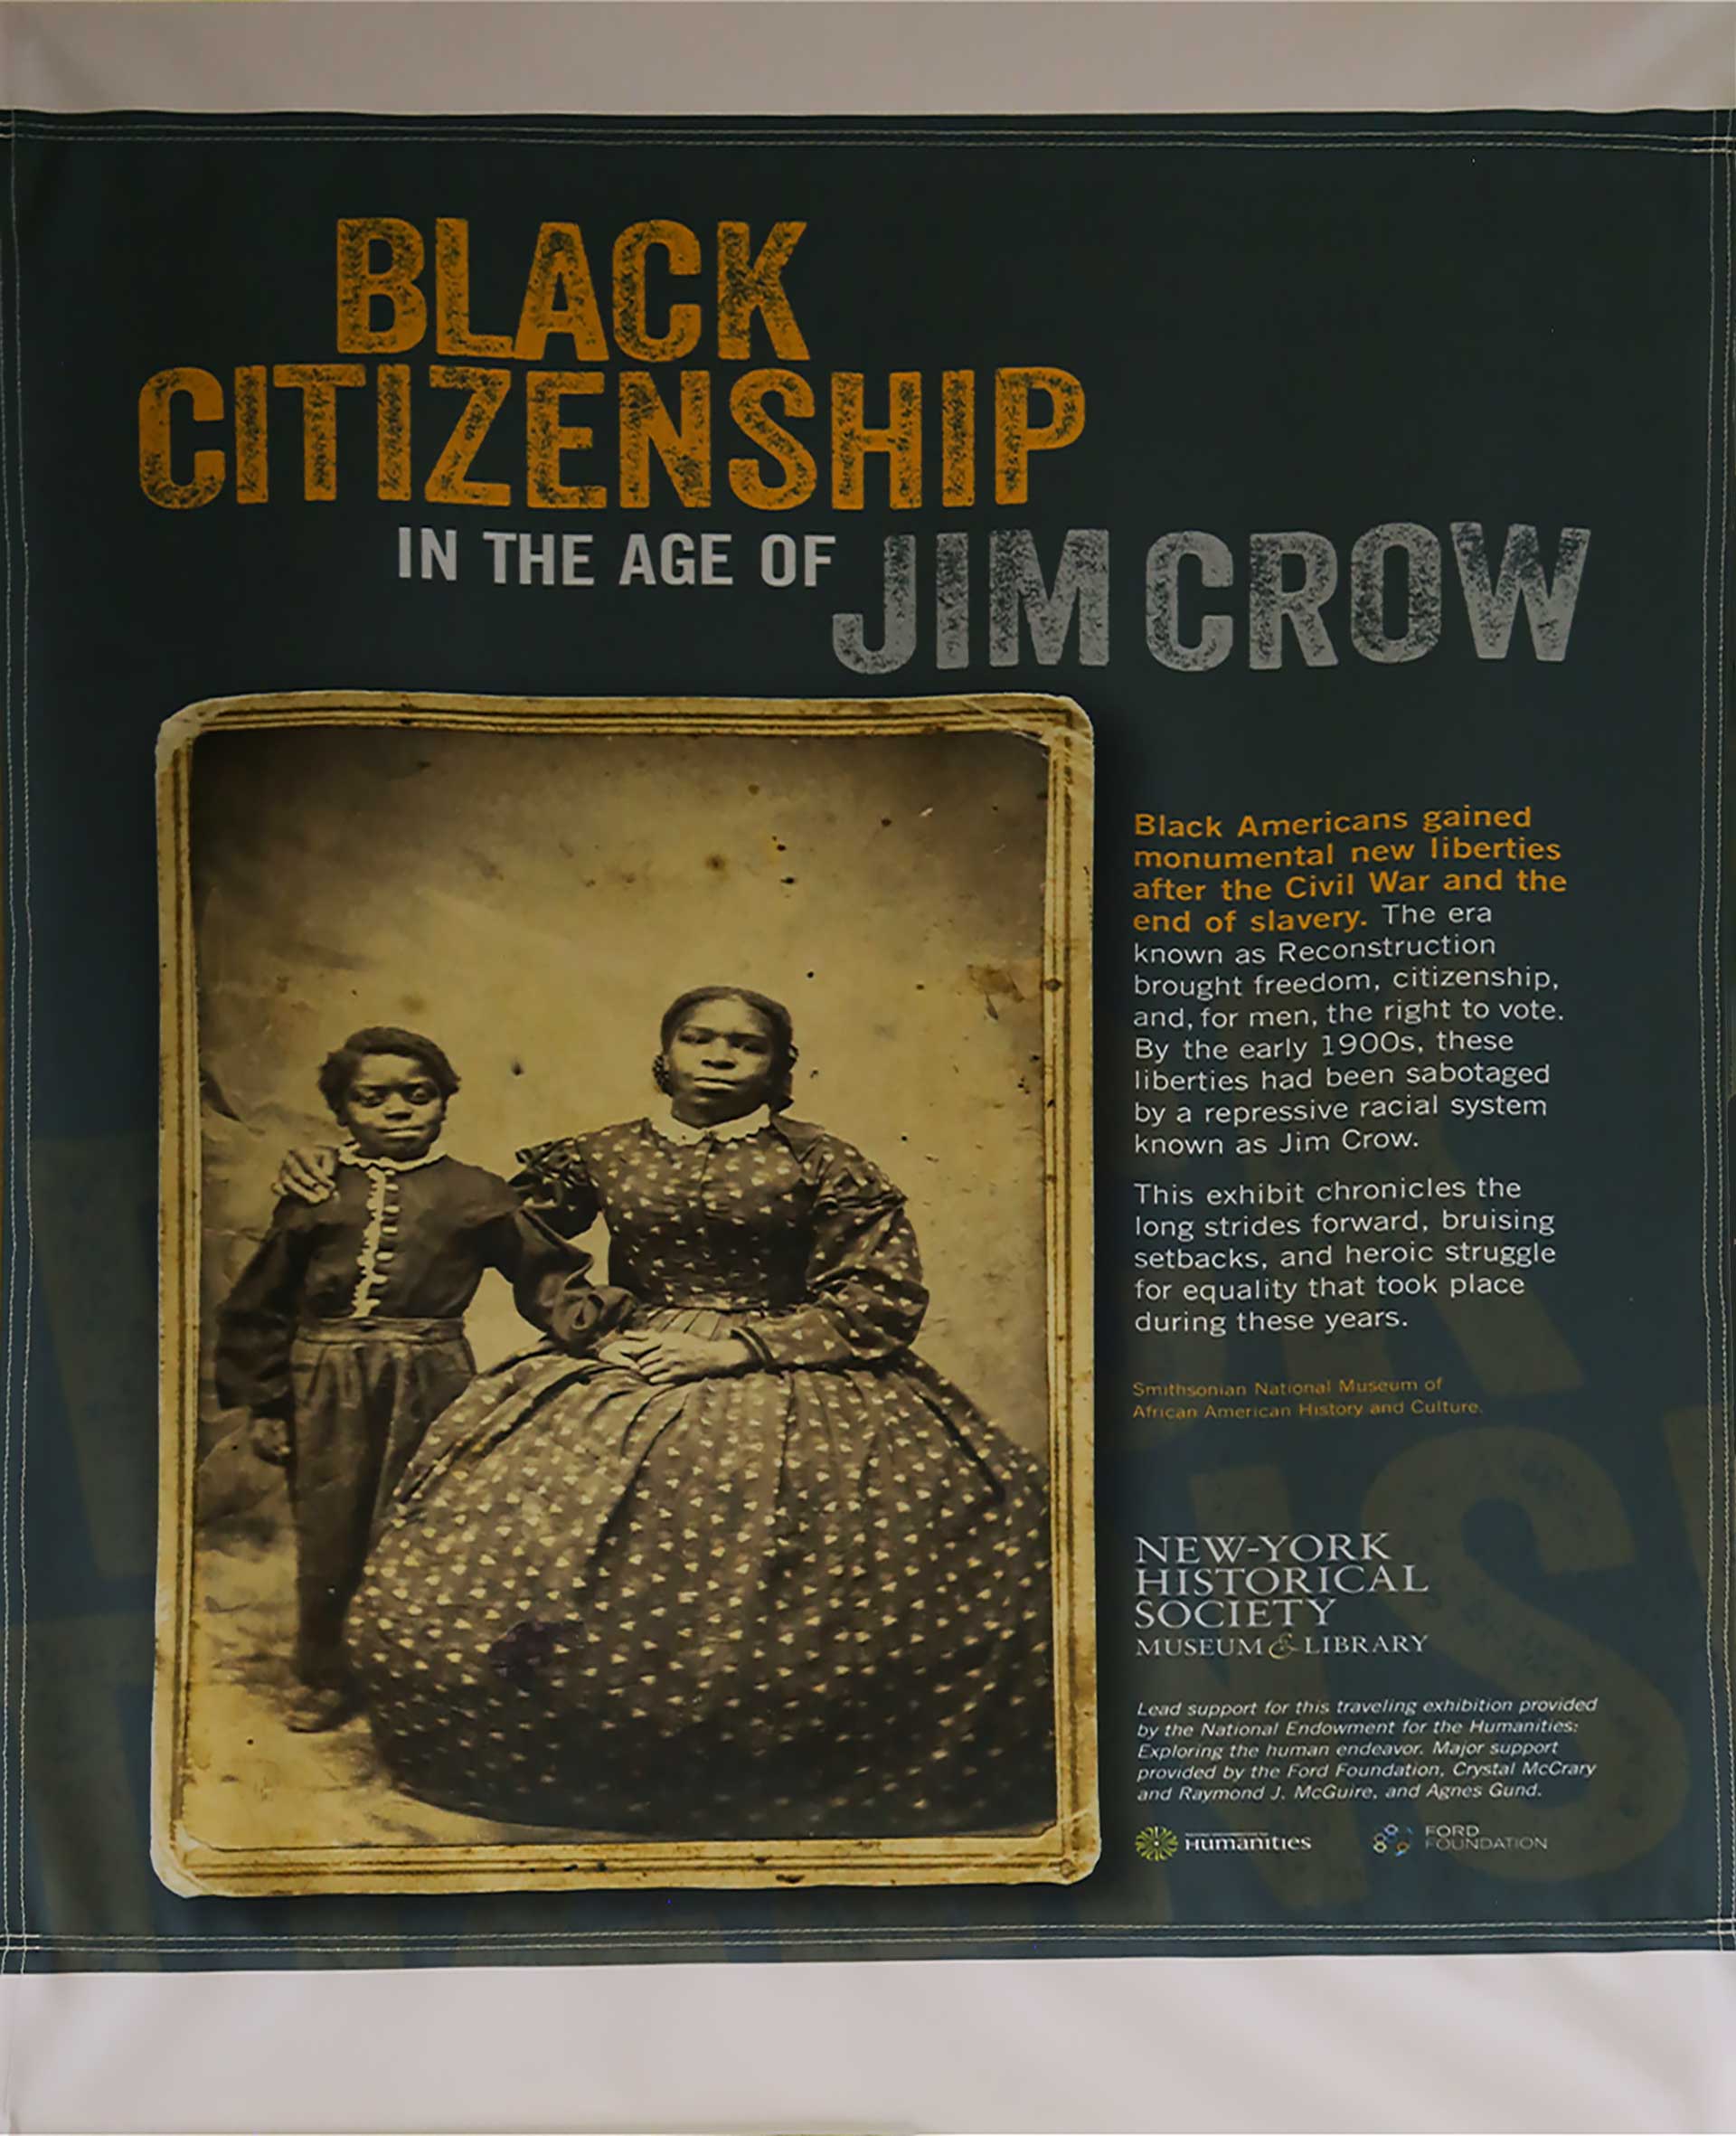 Poster about black citizenship in the age of Jim Crow